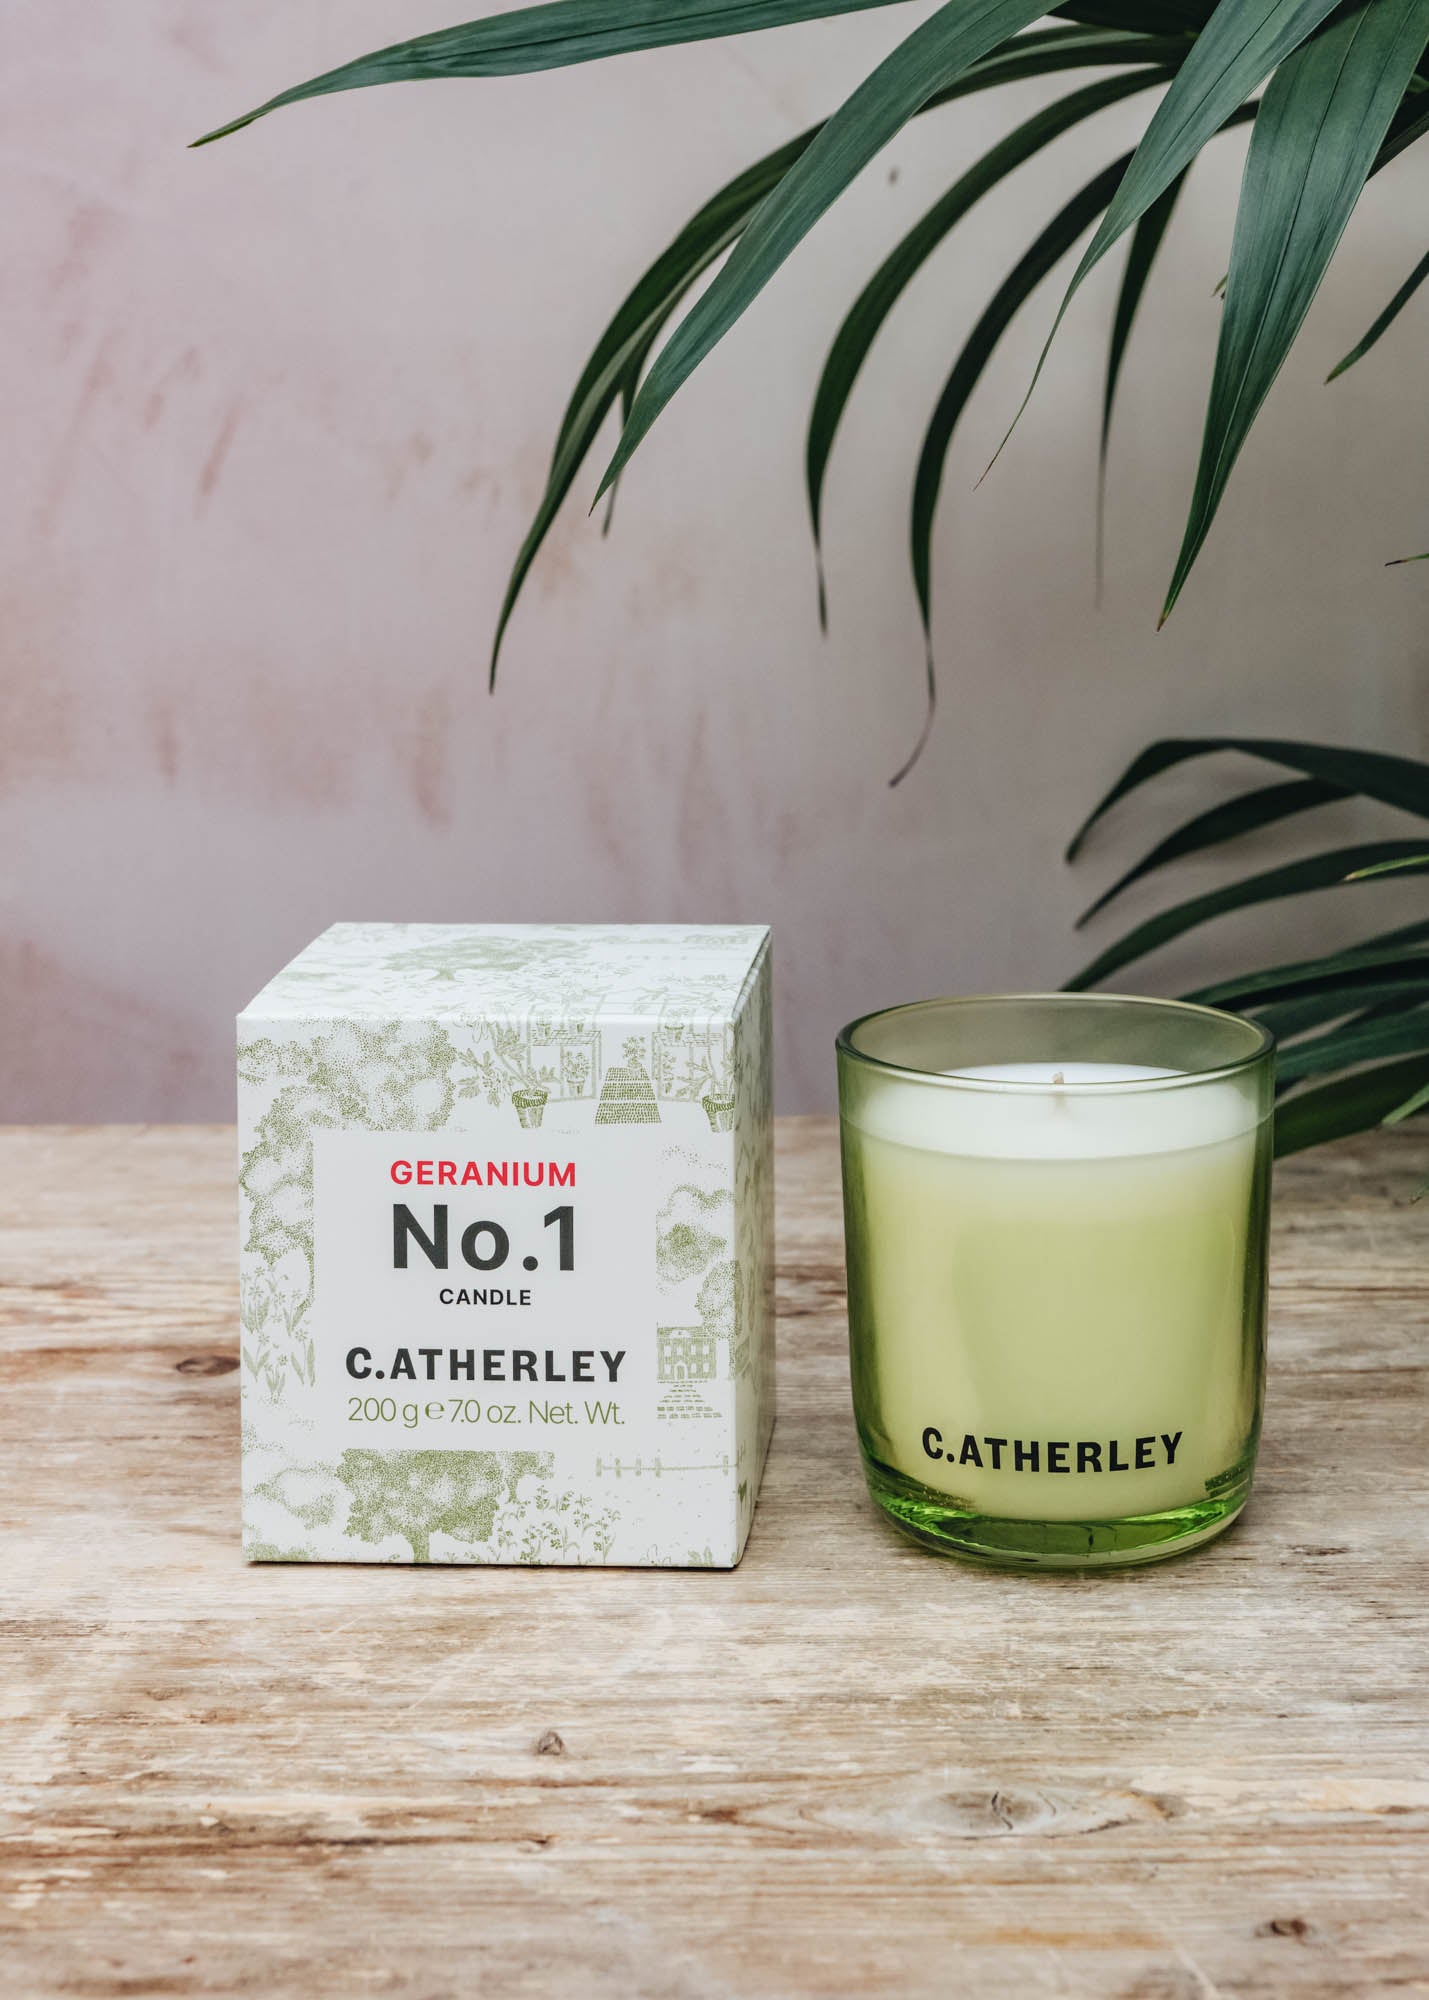 C.Atherley Geranium No.1 Scented Candle, 200g